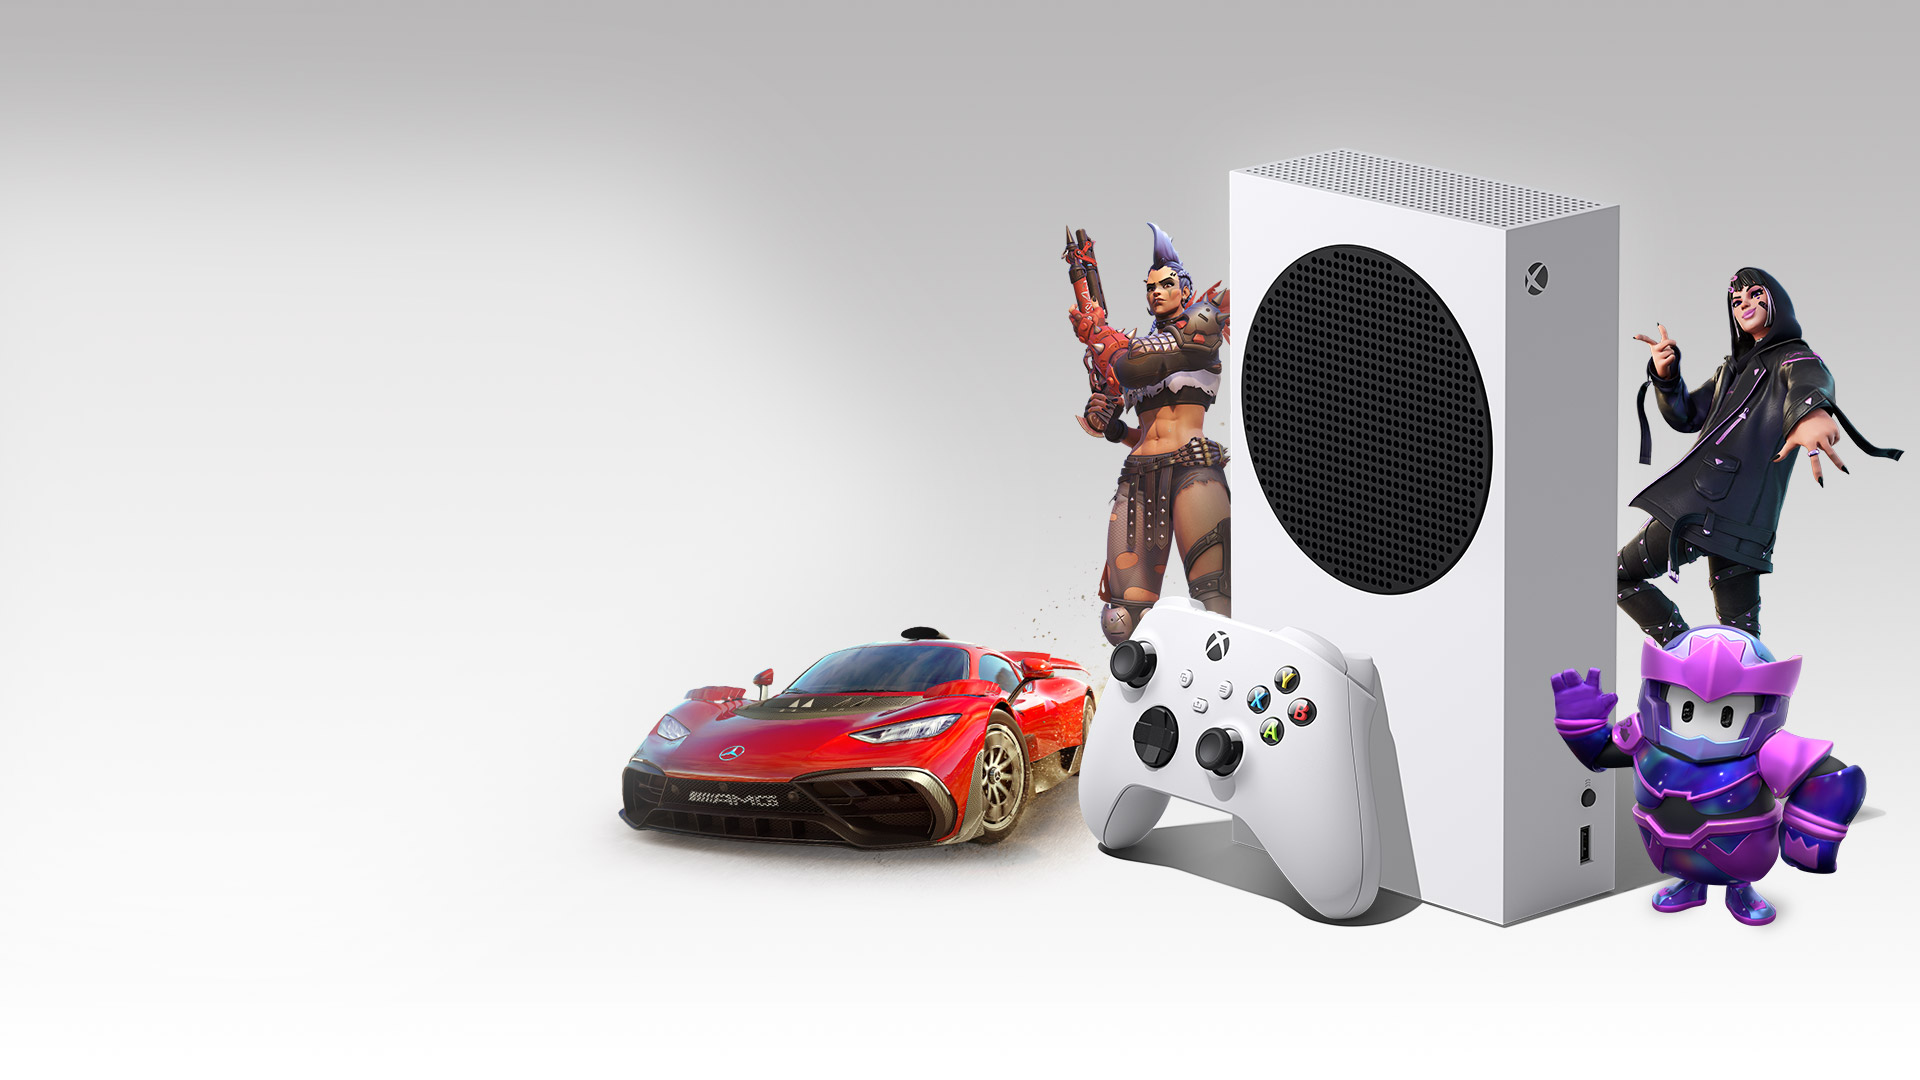 An Xbox Series S surrounded by characters from Overwatch 2, Fortnite, Fall Guys, and the Mercedes-AMG One from Forza Horizon 5.